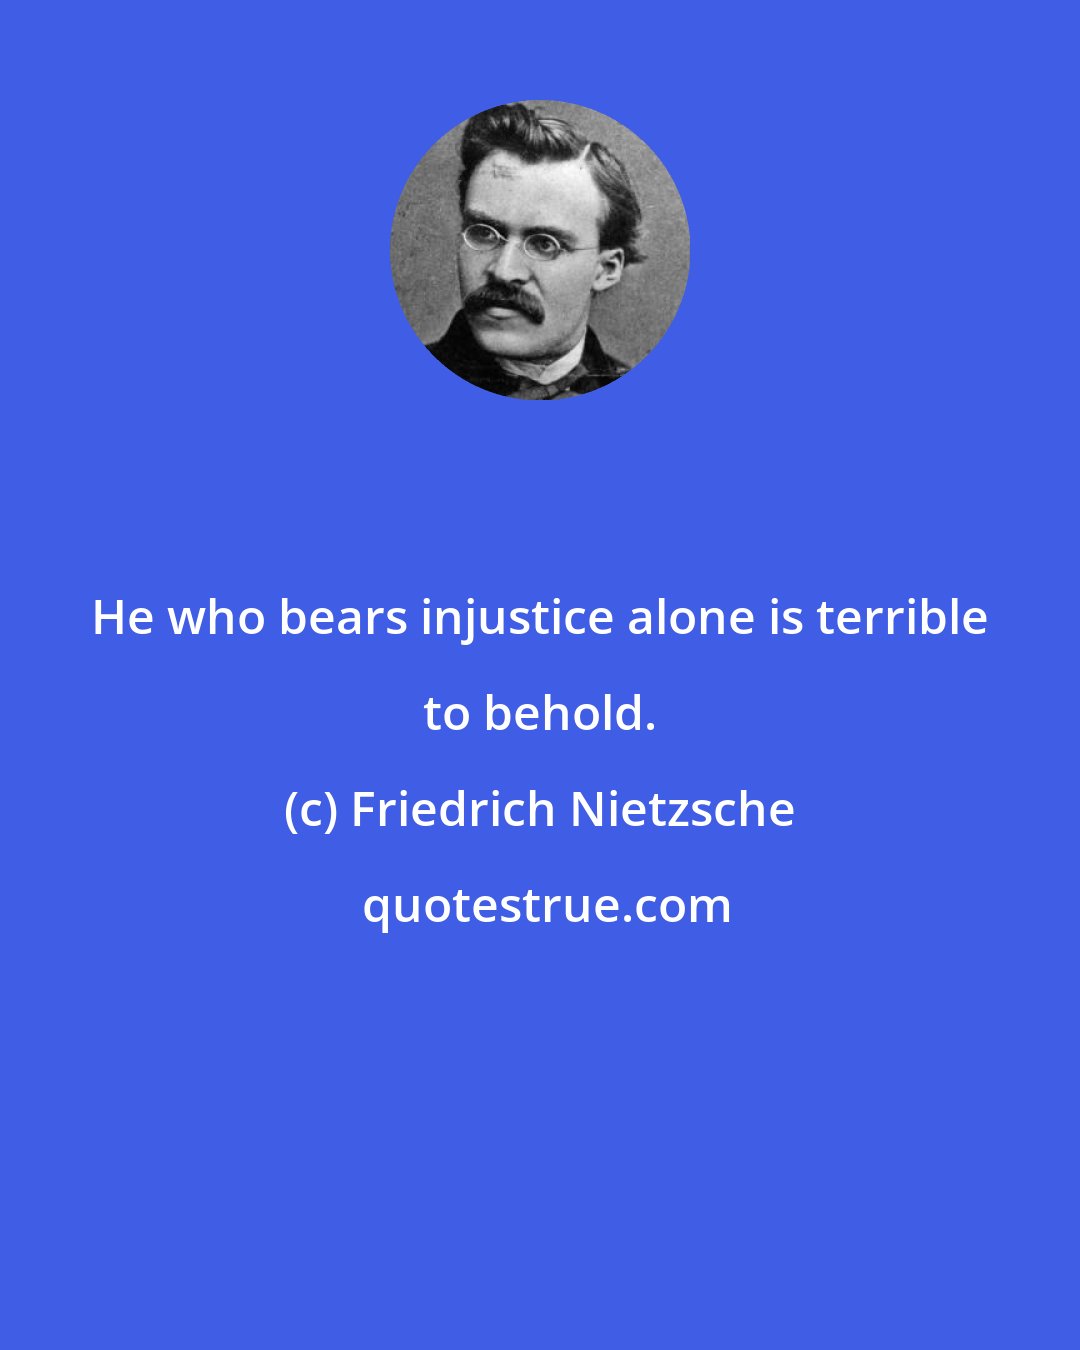 Friedrich Nietzsche: He who bears injustice alone is terrible to behold.